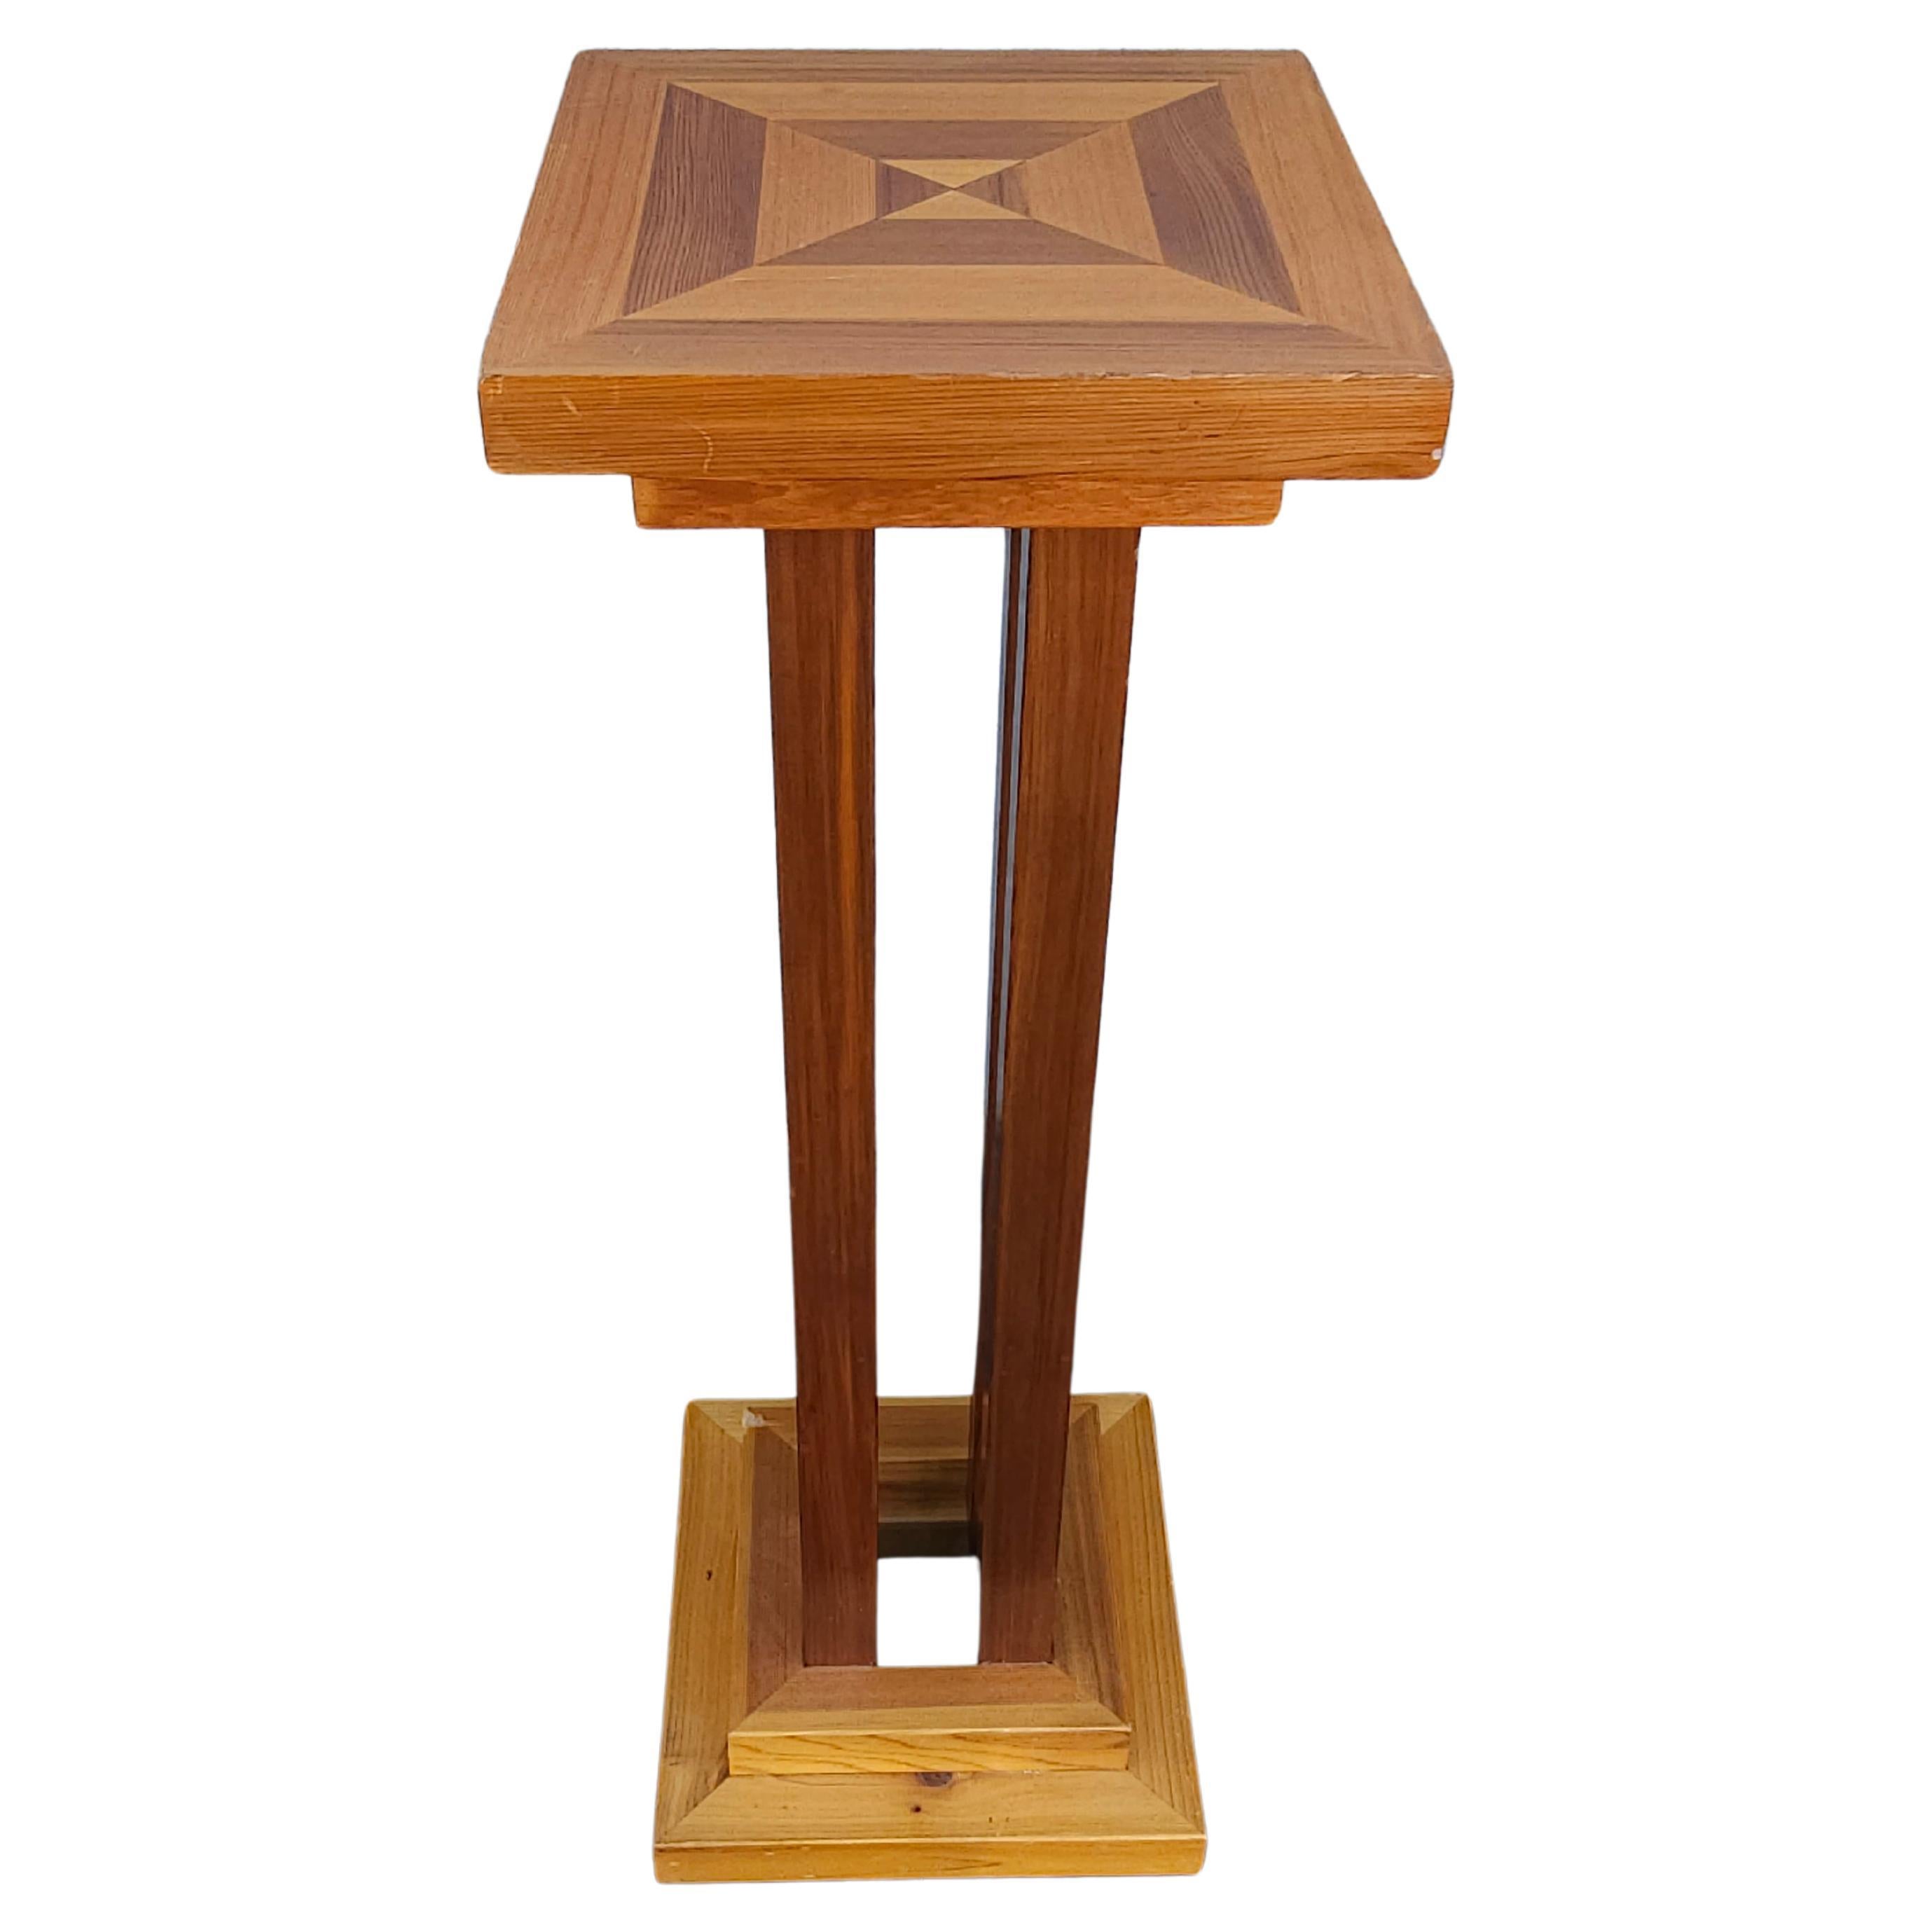 A 20th Century Mixed Fruitwood Parquetry Plant Stand measuring 11